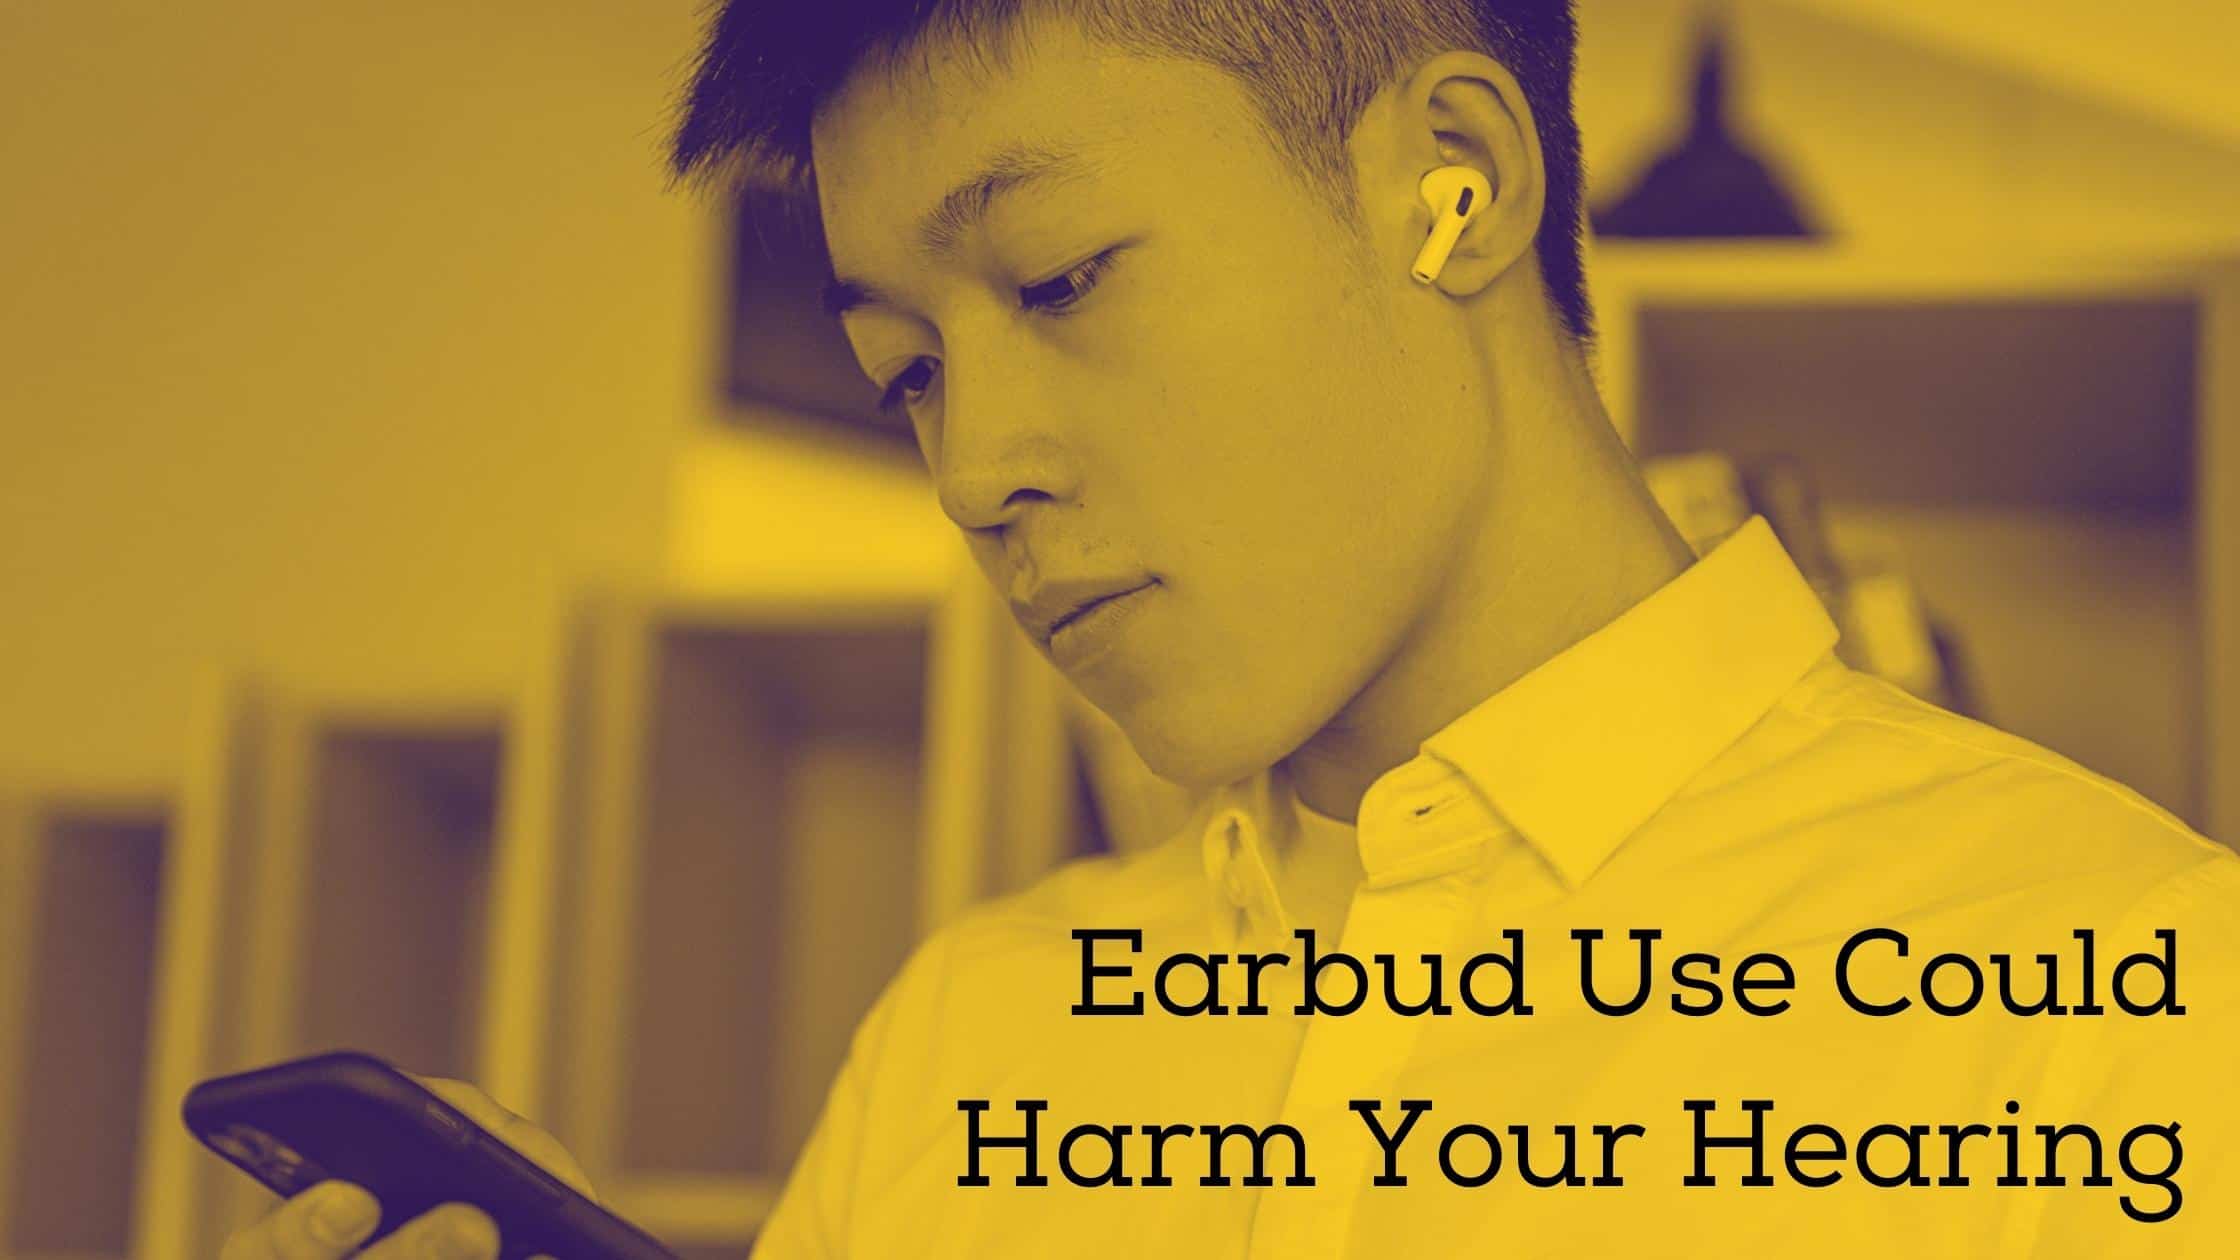 Featured image for “Using Earbuds Can Damage Your Hearing”